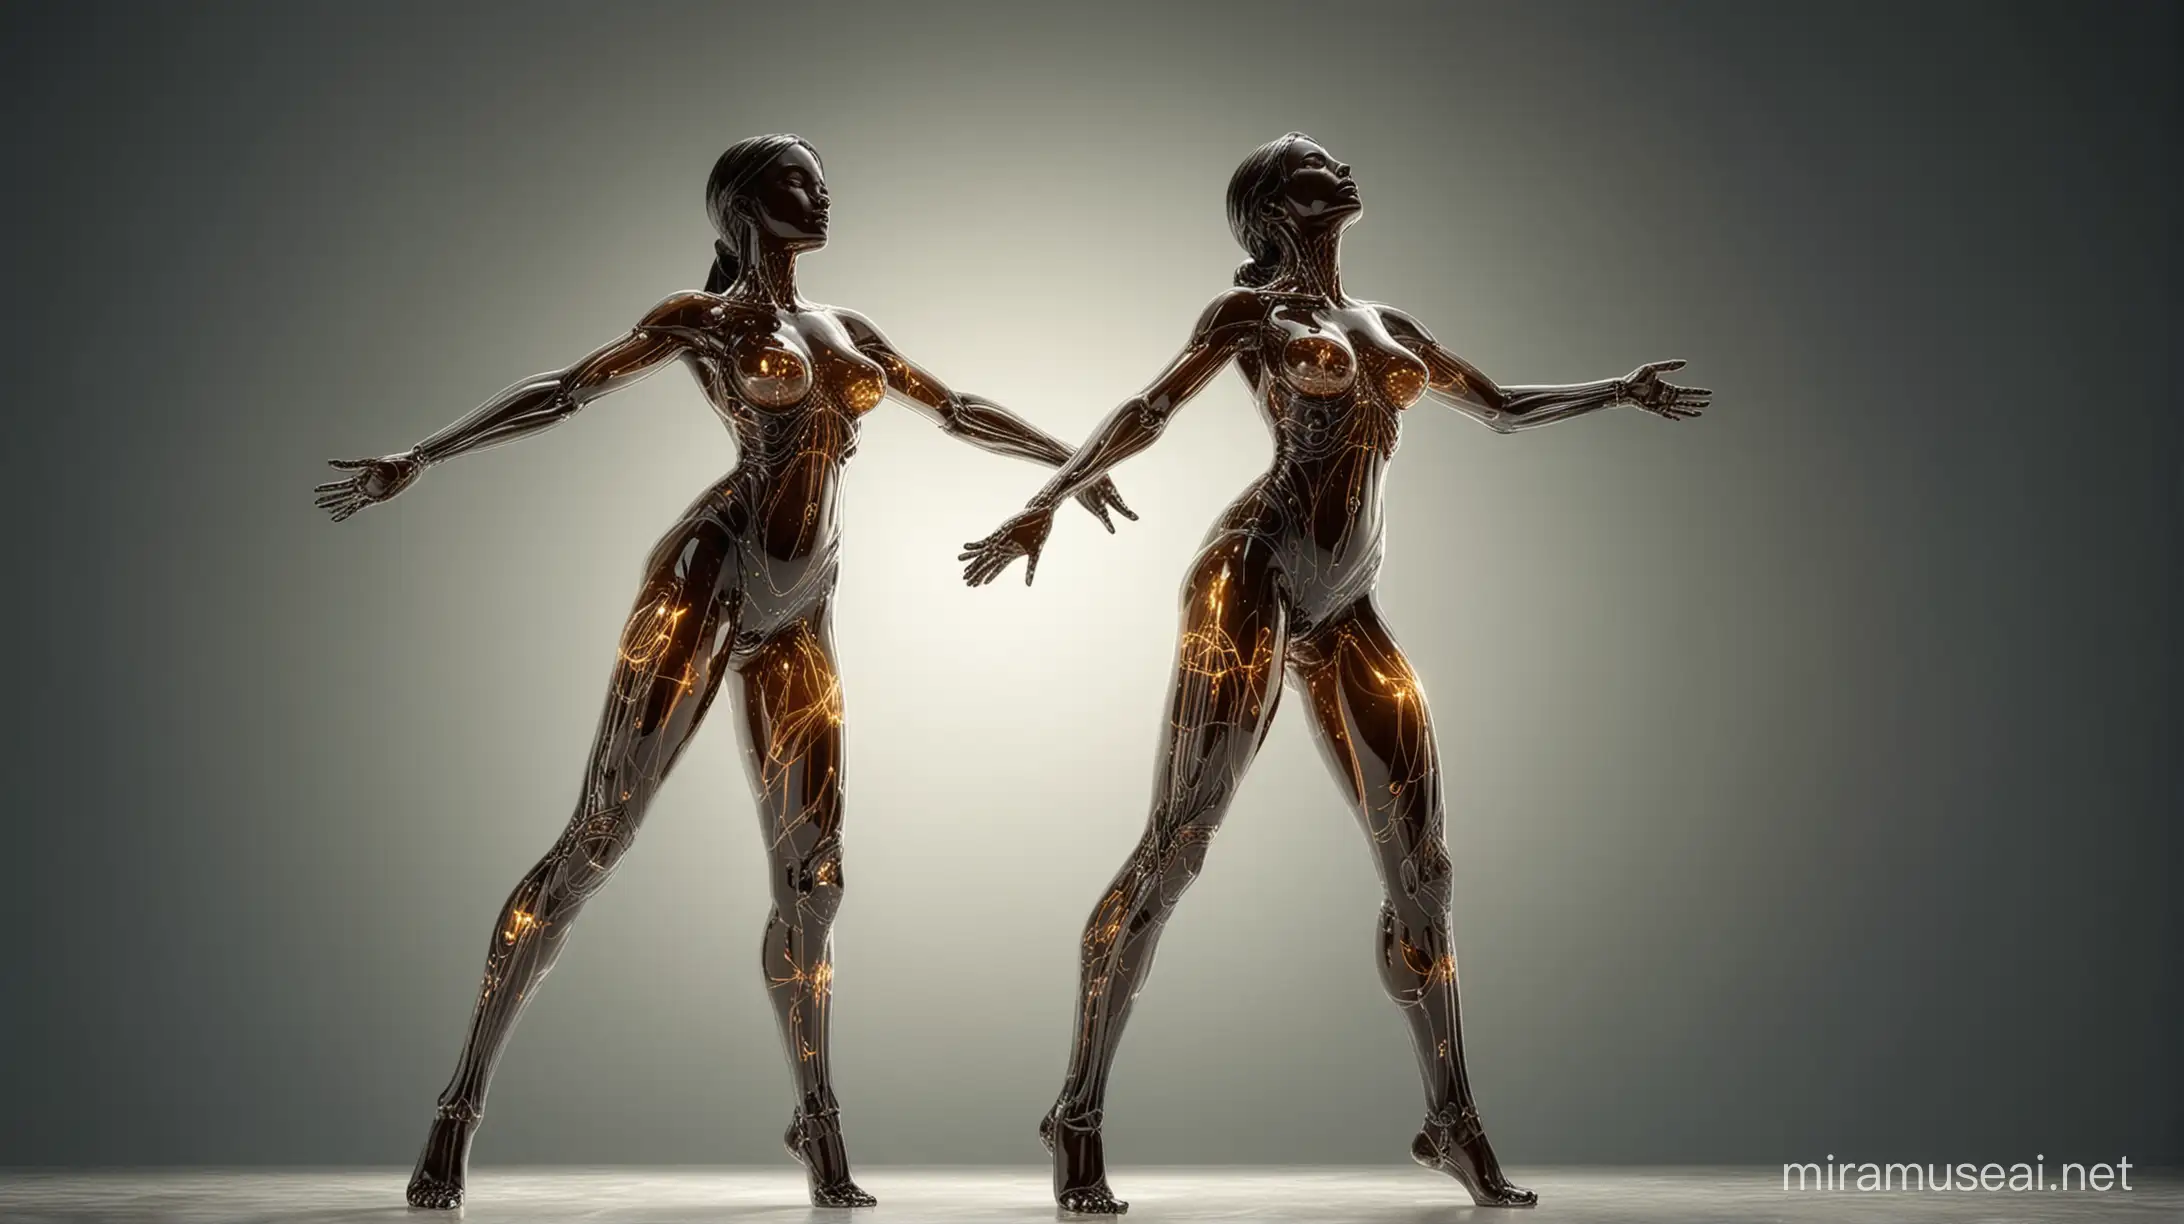 a beautiful glass figure, whole body made of glass , some machine glowing inside body, standing with spread legs and hands open pose,elegant pose, sideview, backlit, fantasy art, long shot, 